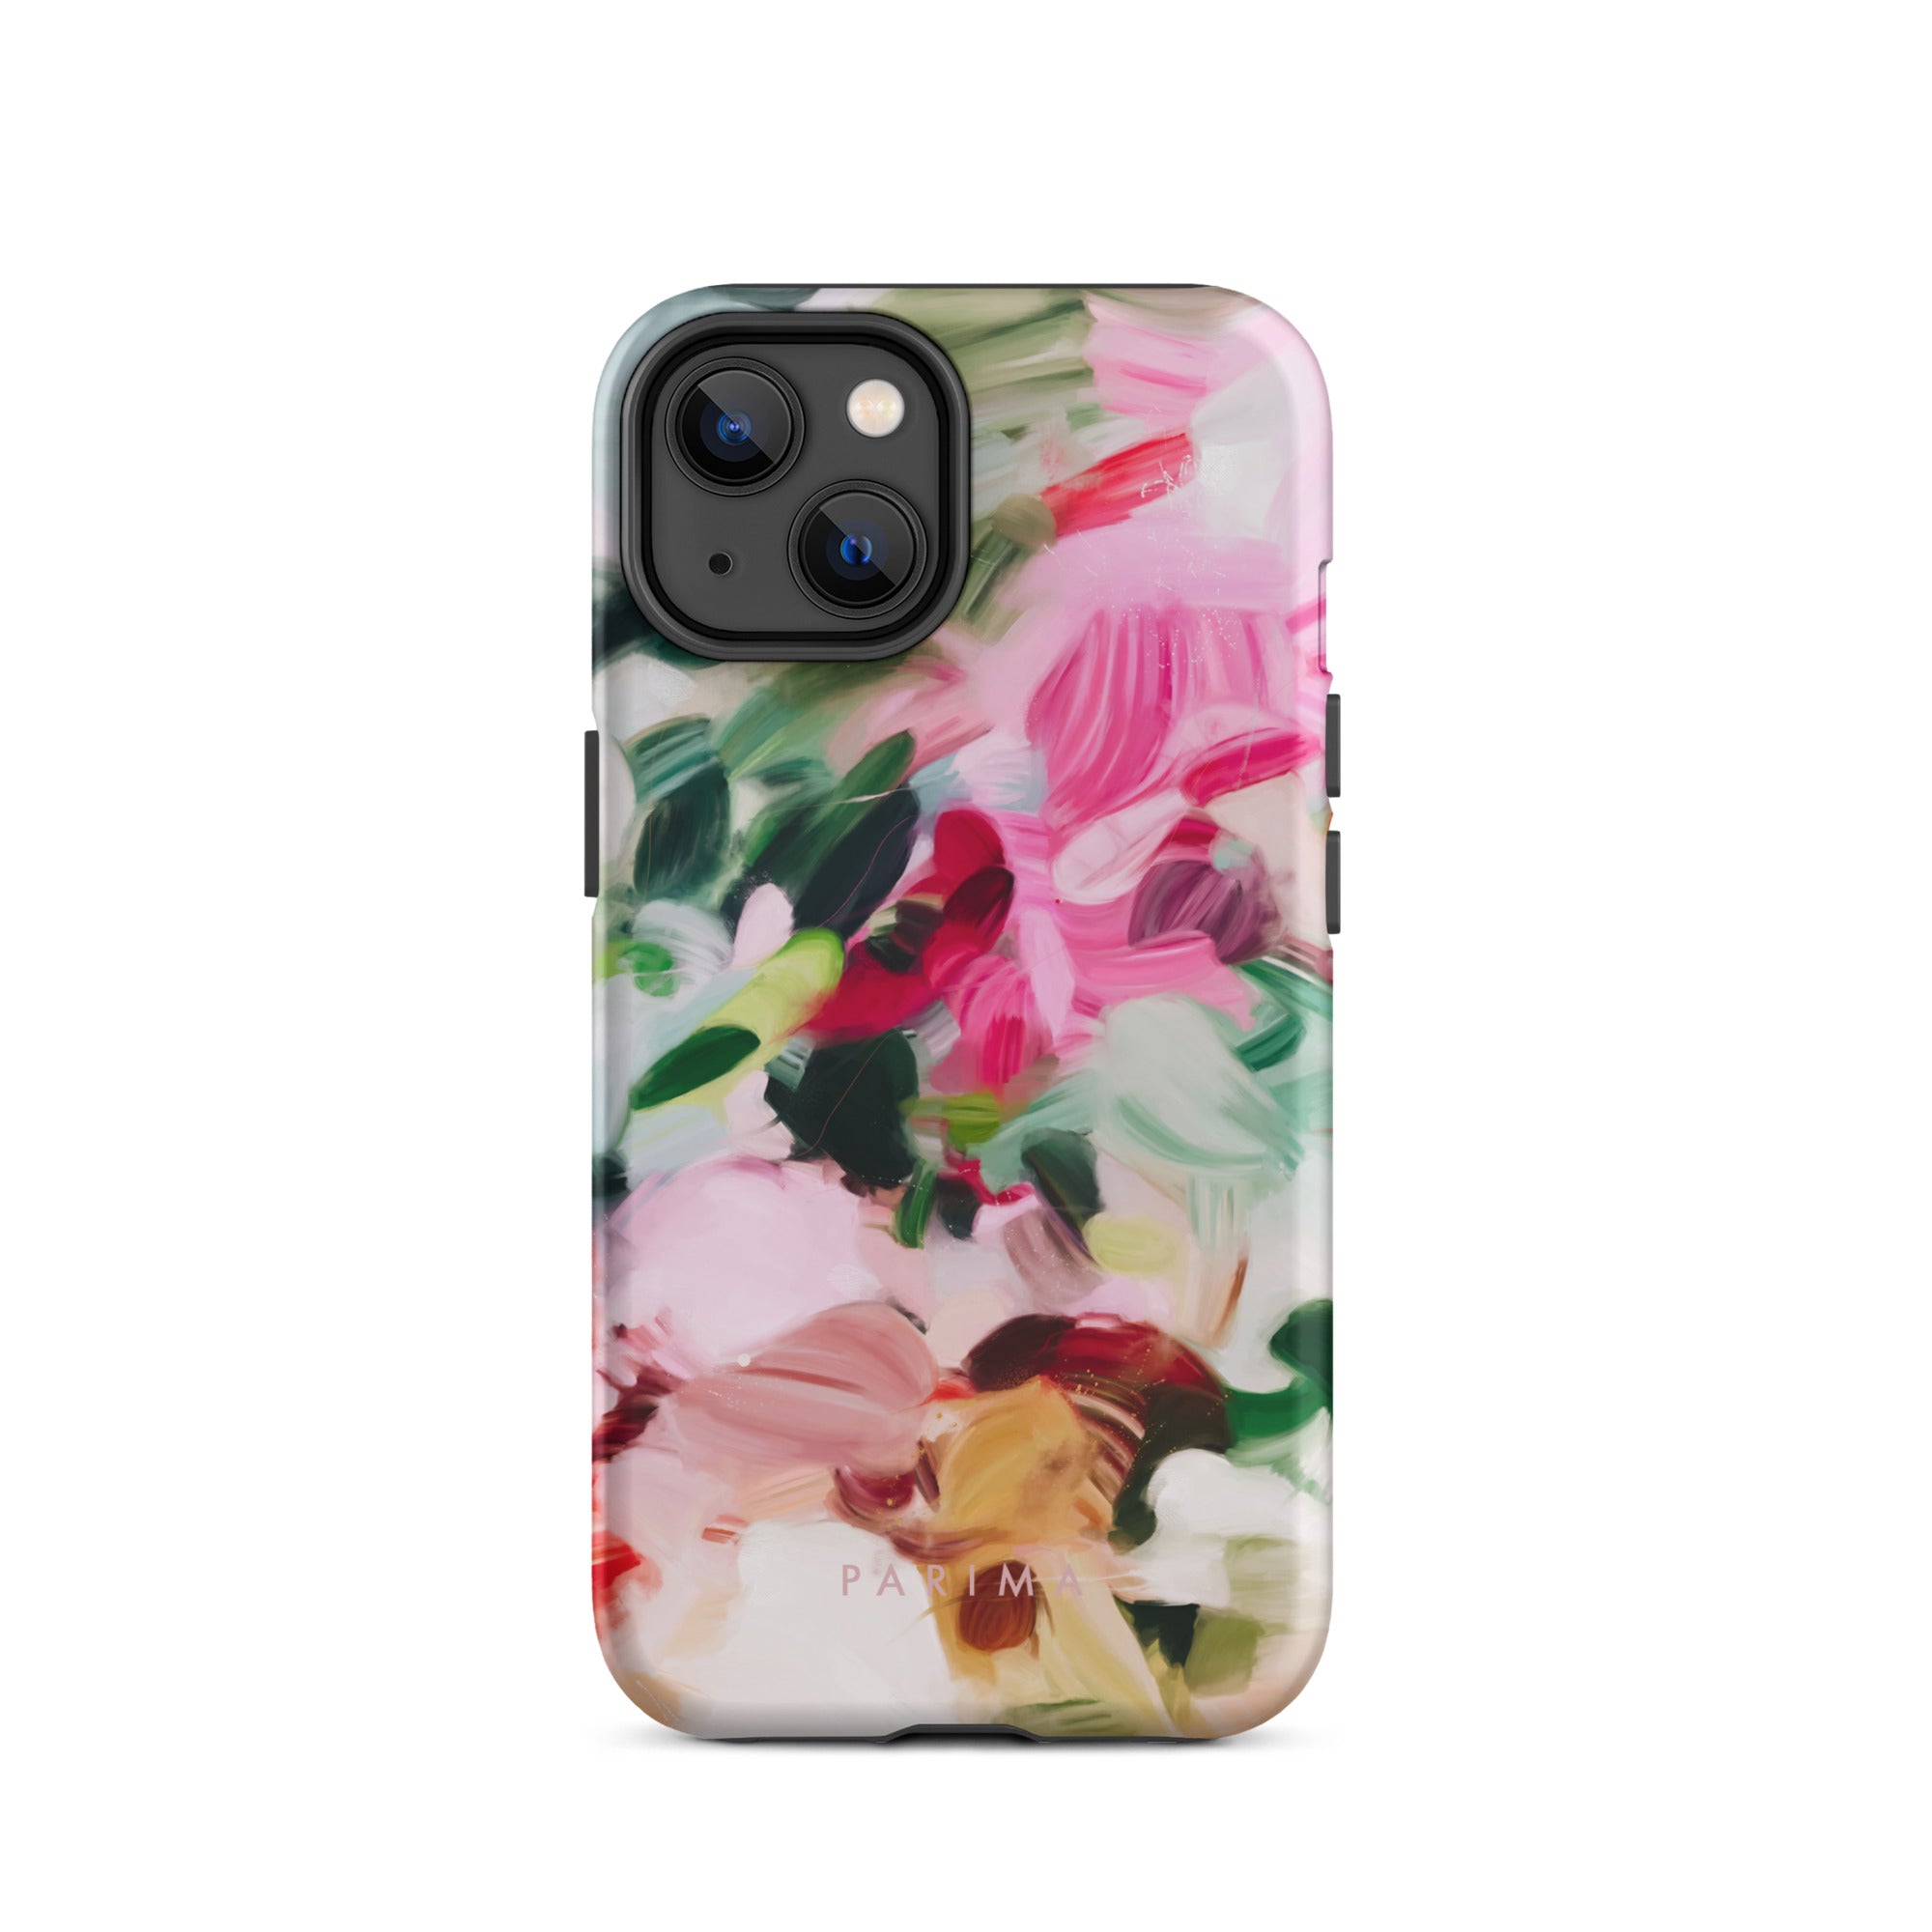 Bloom, pink and green abstract art - iPhone 14 tough case by Parima Studio